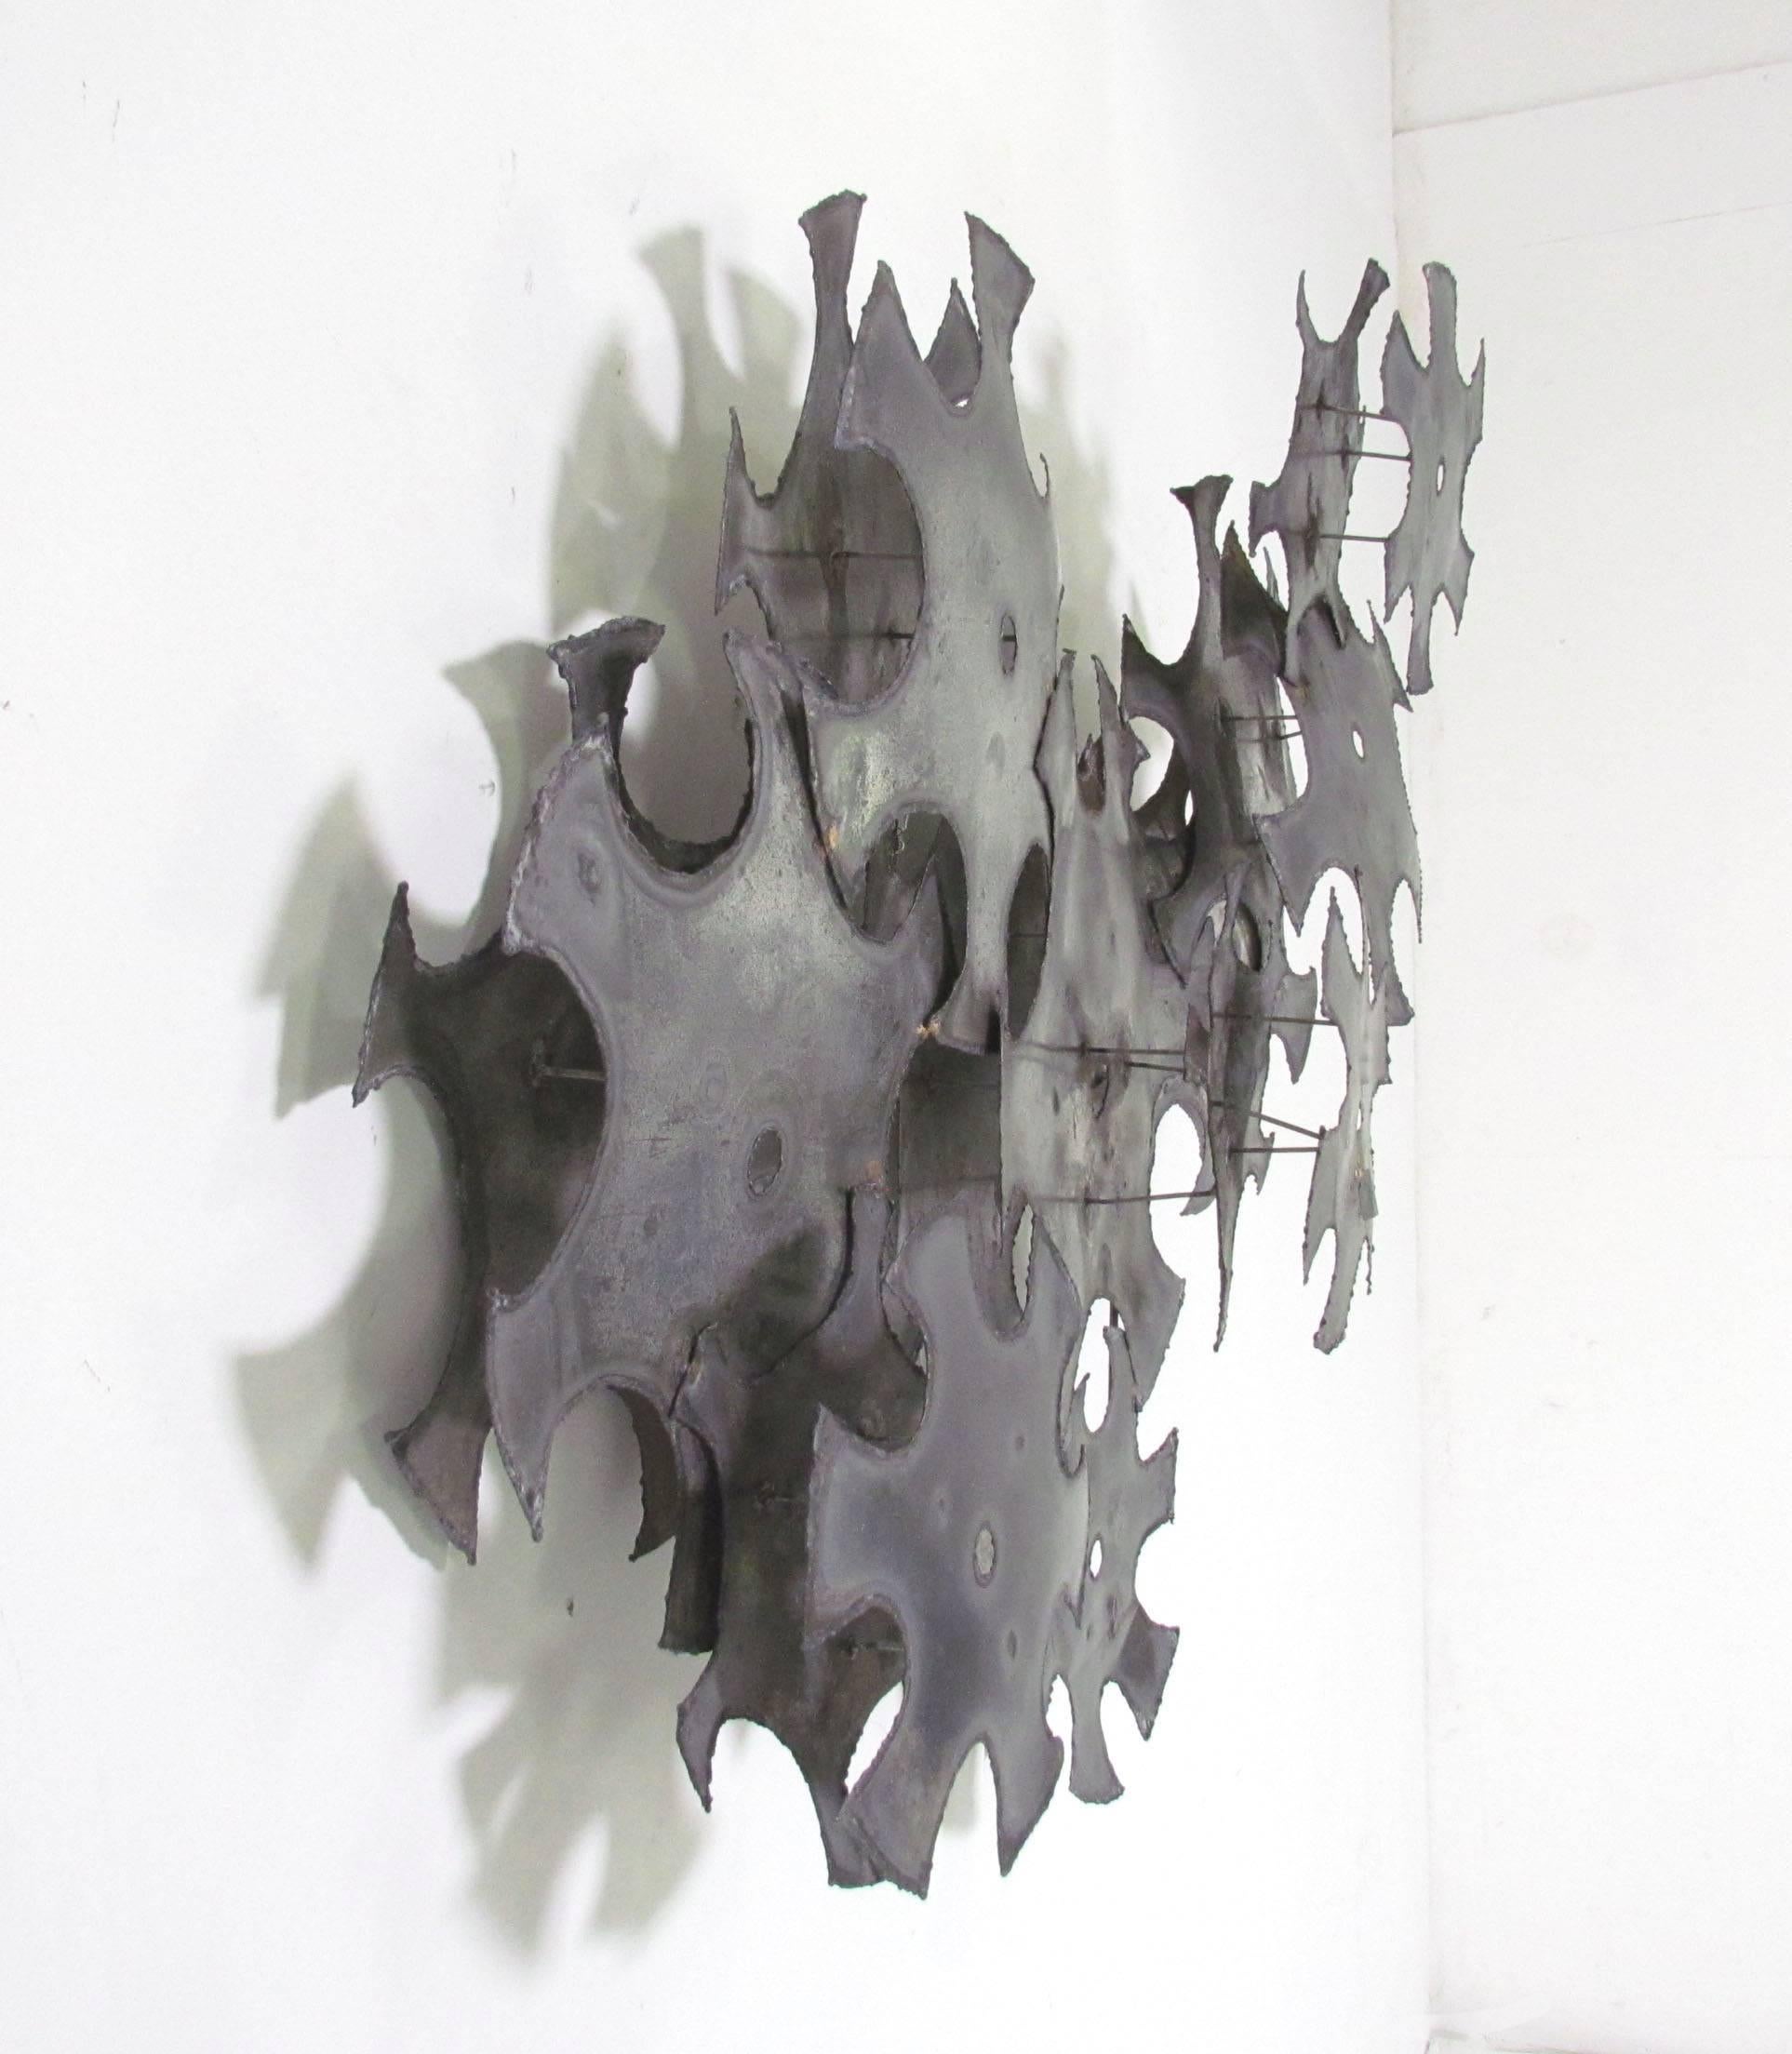 Industrial metal work abstract wall sculpture by Don Freedman, circa 1970s. Noted for his textile fibre art, Freedman also created metal wall sculpture.